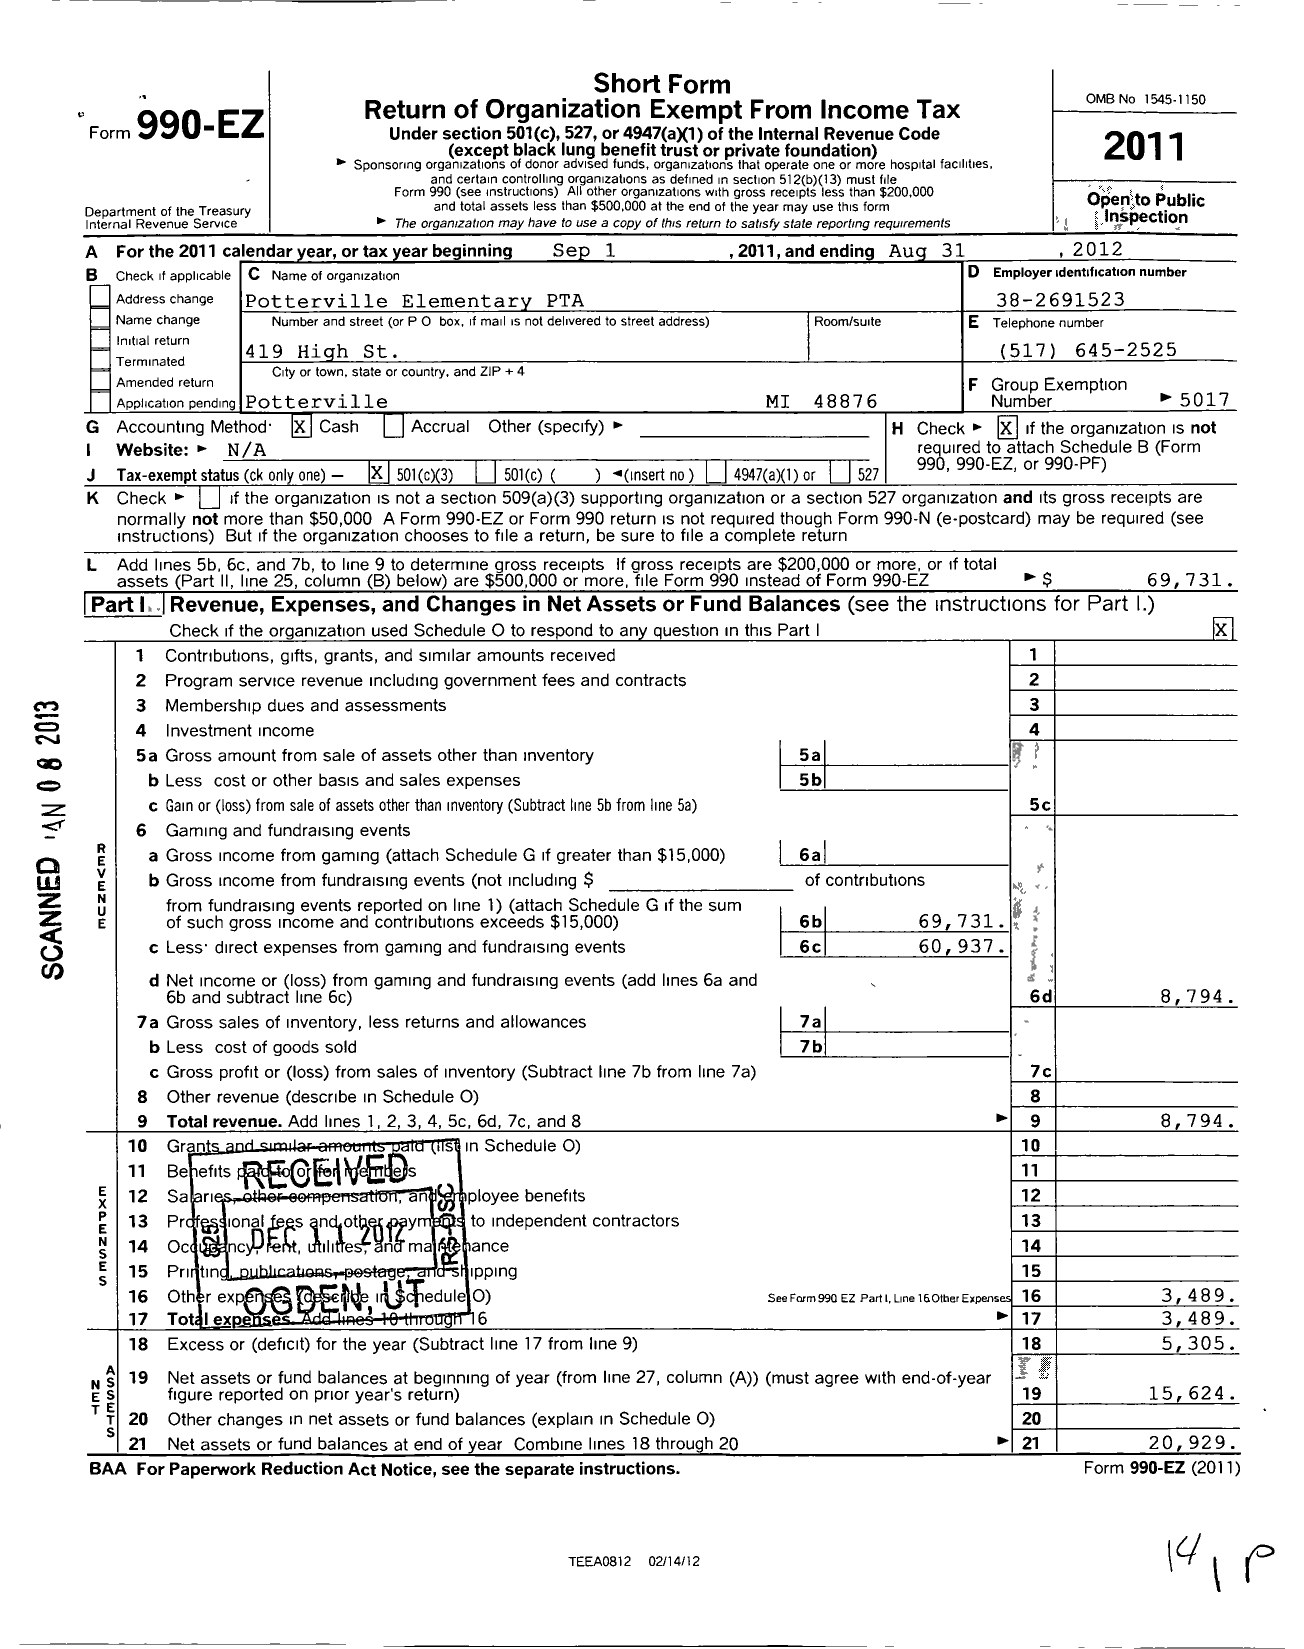 Image of first page of 2011 Form 990EZ for Ptsa Michigan Congress of Parents Teachers and Students / Potterville Elementary PTA